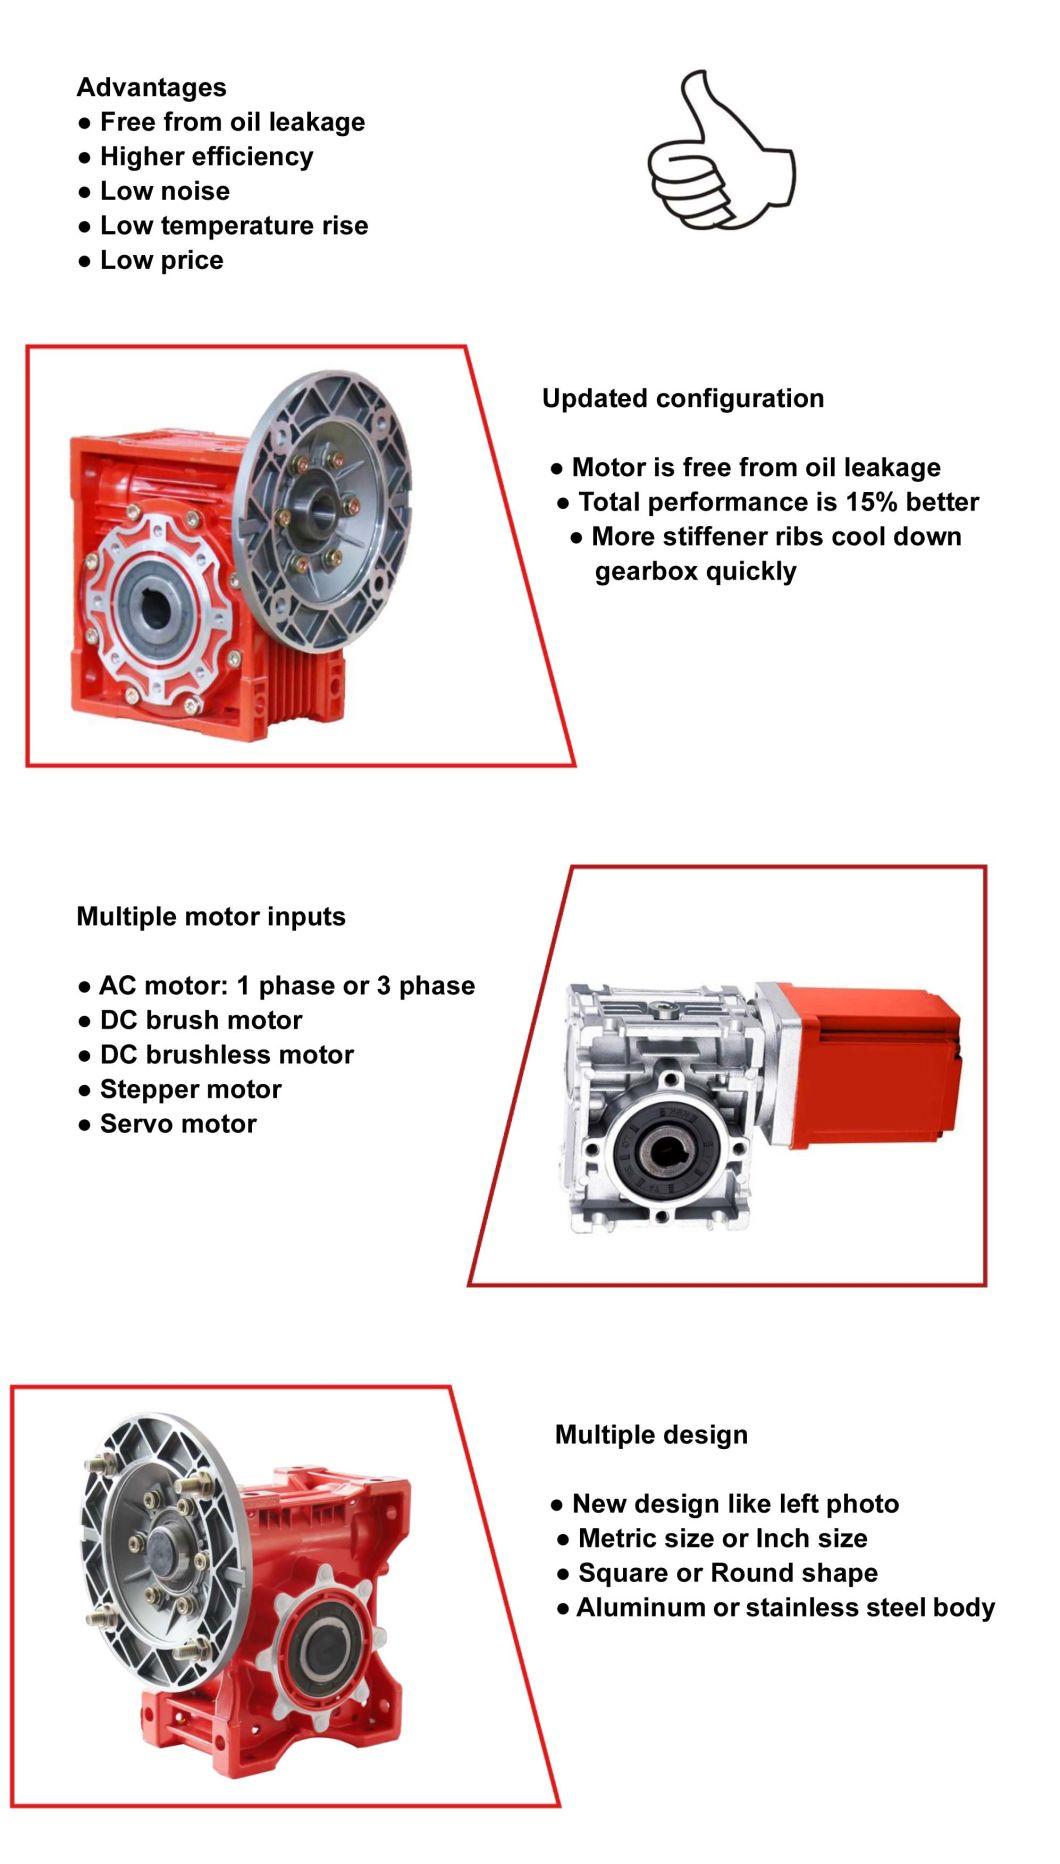 RV Aluminum Material Worm Gearbox with Engine, Reductor with Output Shaft